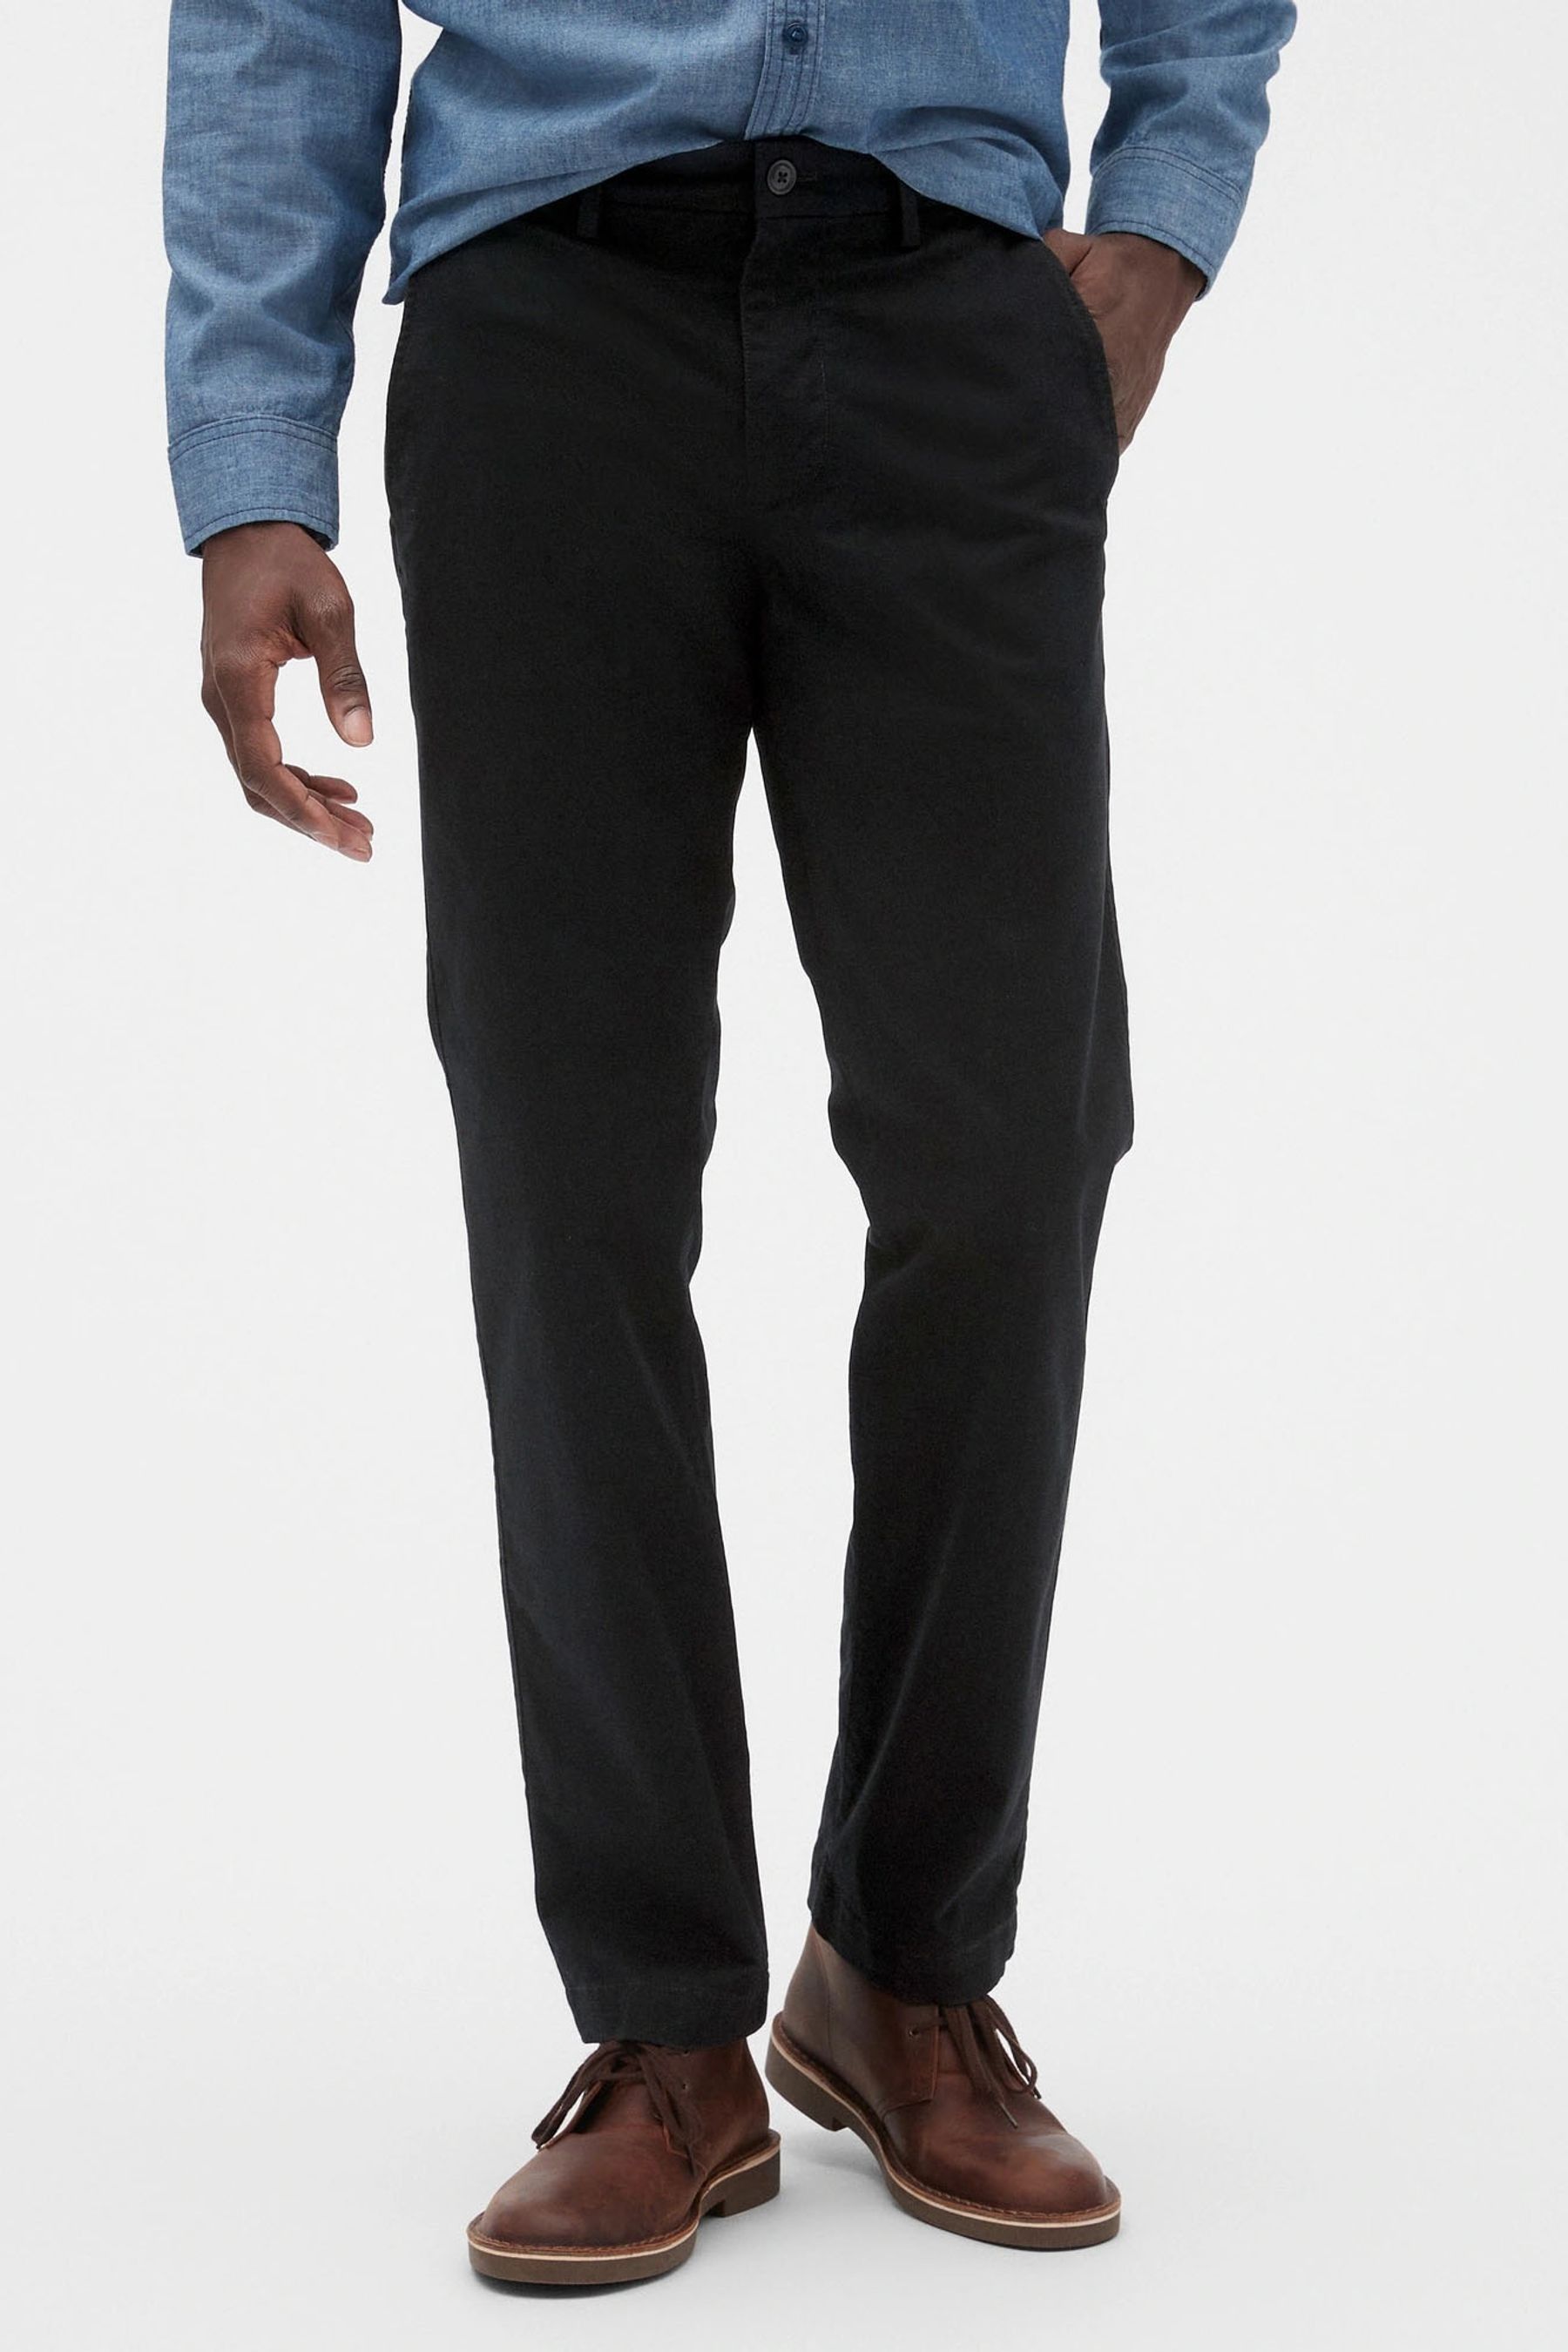 Buy Gap Black Straight Fit Essential Chinos from the Next UK online shop